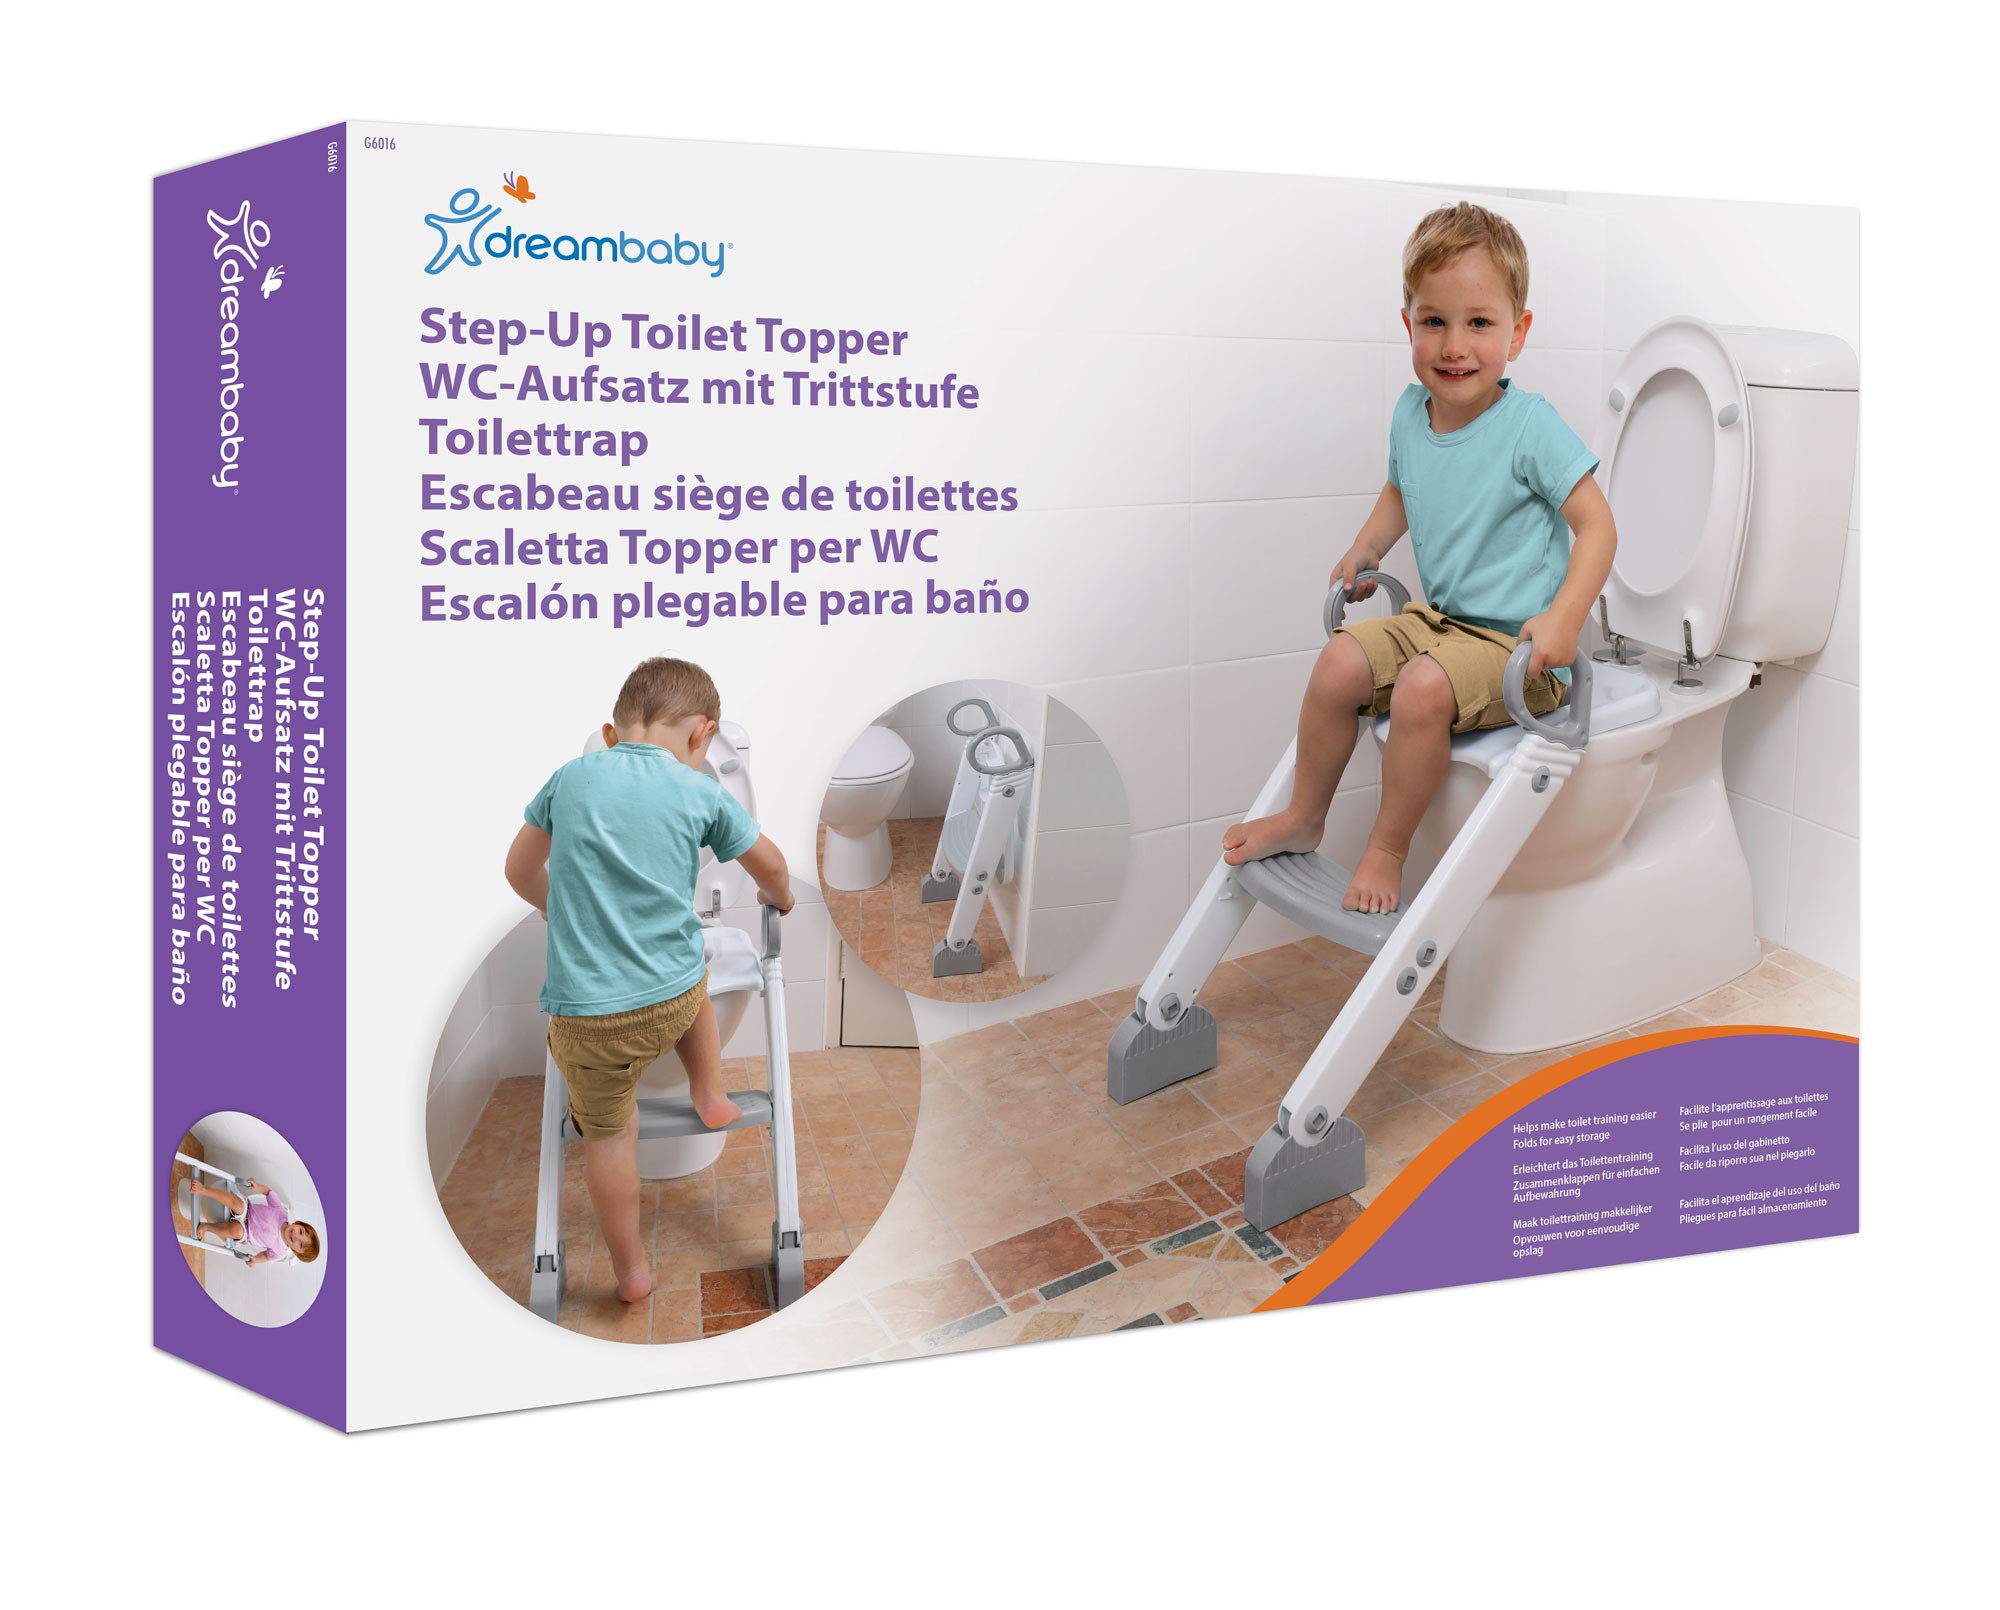 Dreambaby Step-Up Potty Training Toilet Topper - 2-Level Adjustable -Grey-Model G6016, 1 Count (Pack of 1)